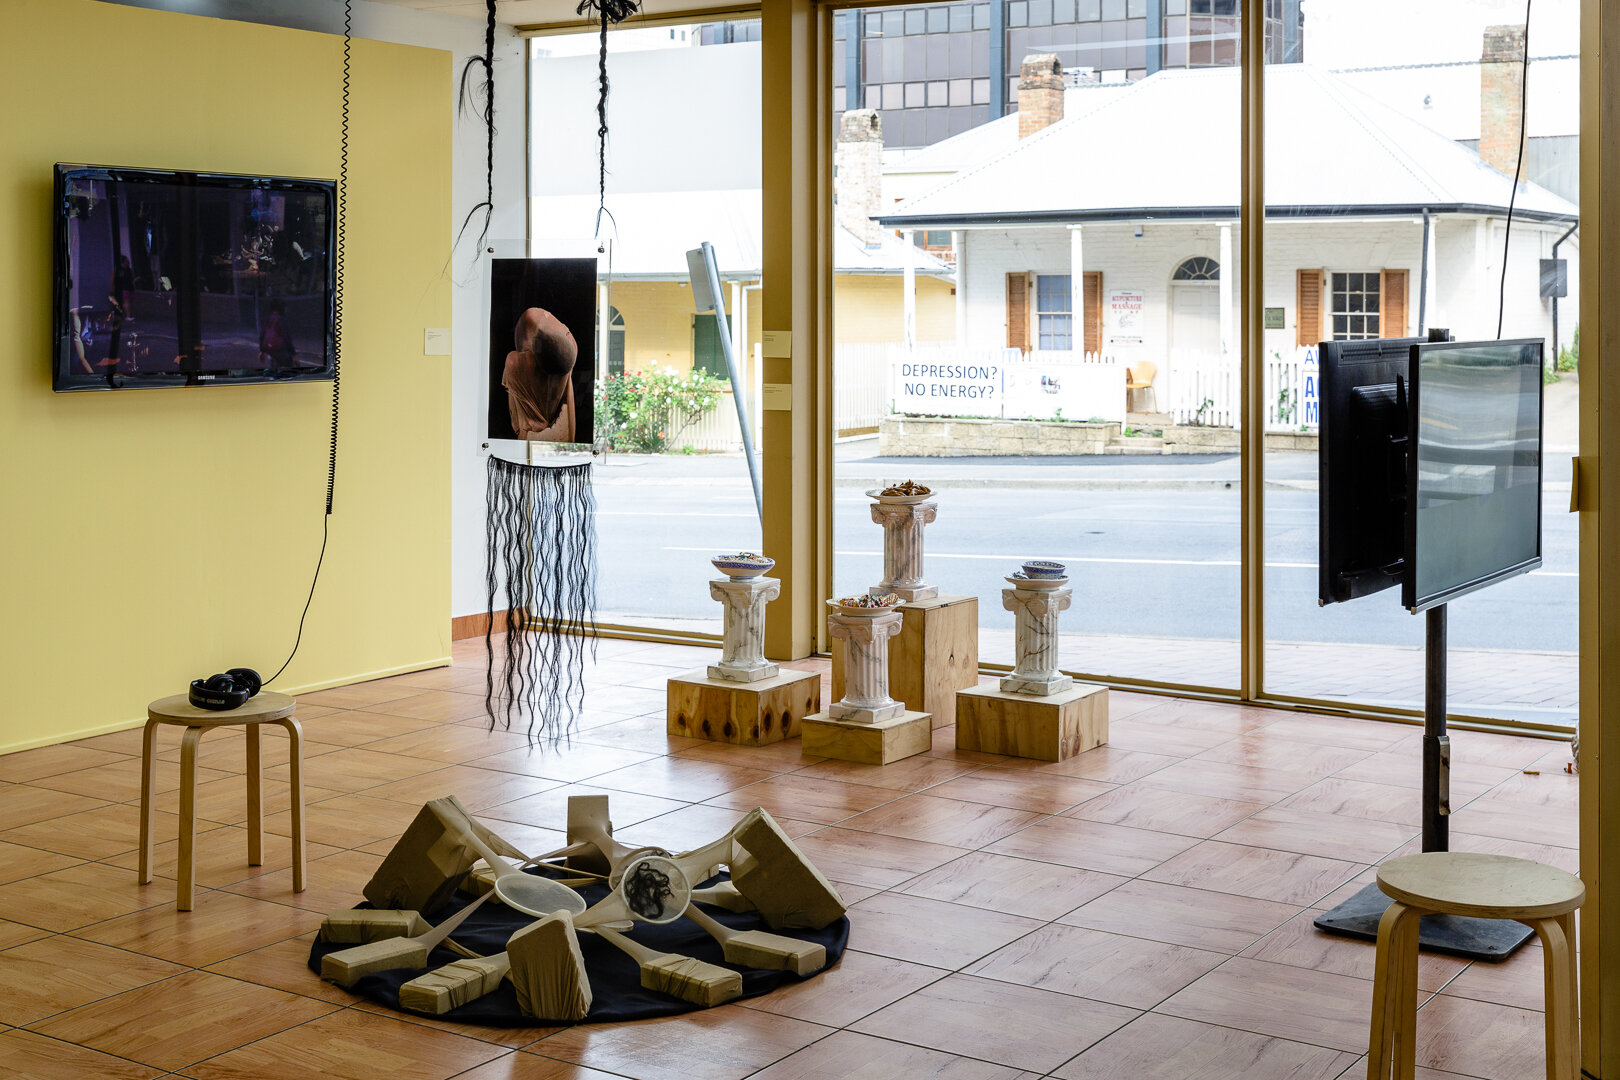   10 Degrees Hotter,  2019, installation view, left: Leila el Rayes,  Live Painting (Revved Up) , 2019, front: Gianna Christella Hayes,  Textural Conversations,  2019, back: Mechelle Bounpraseuth,  Greatest Hits,  2019, right: Shivanjani Lal,  Like t